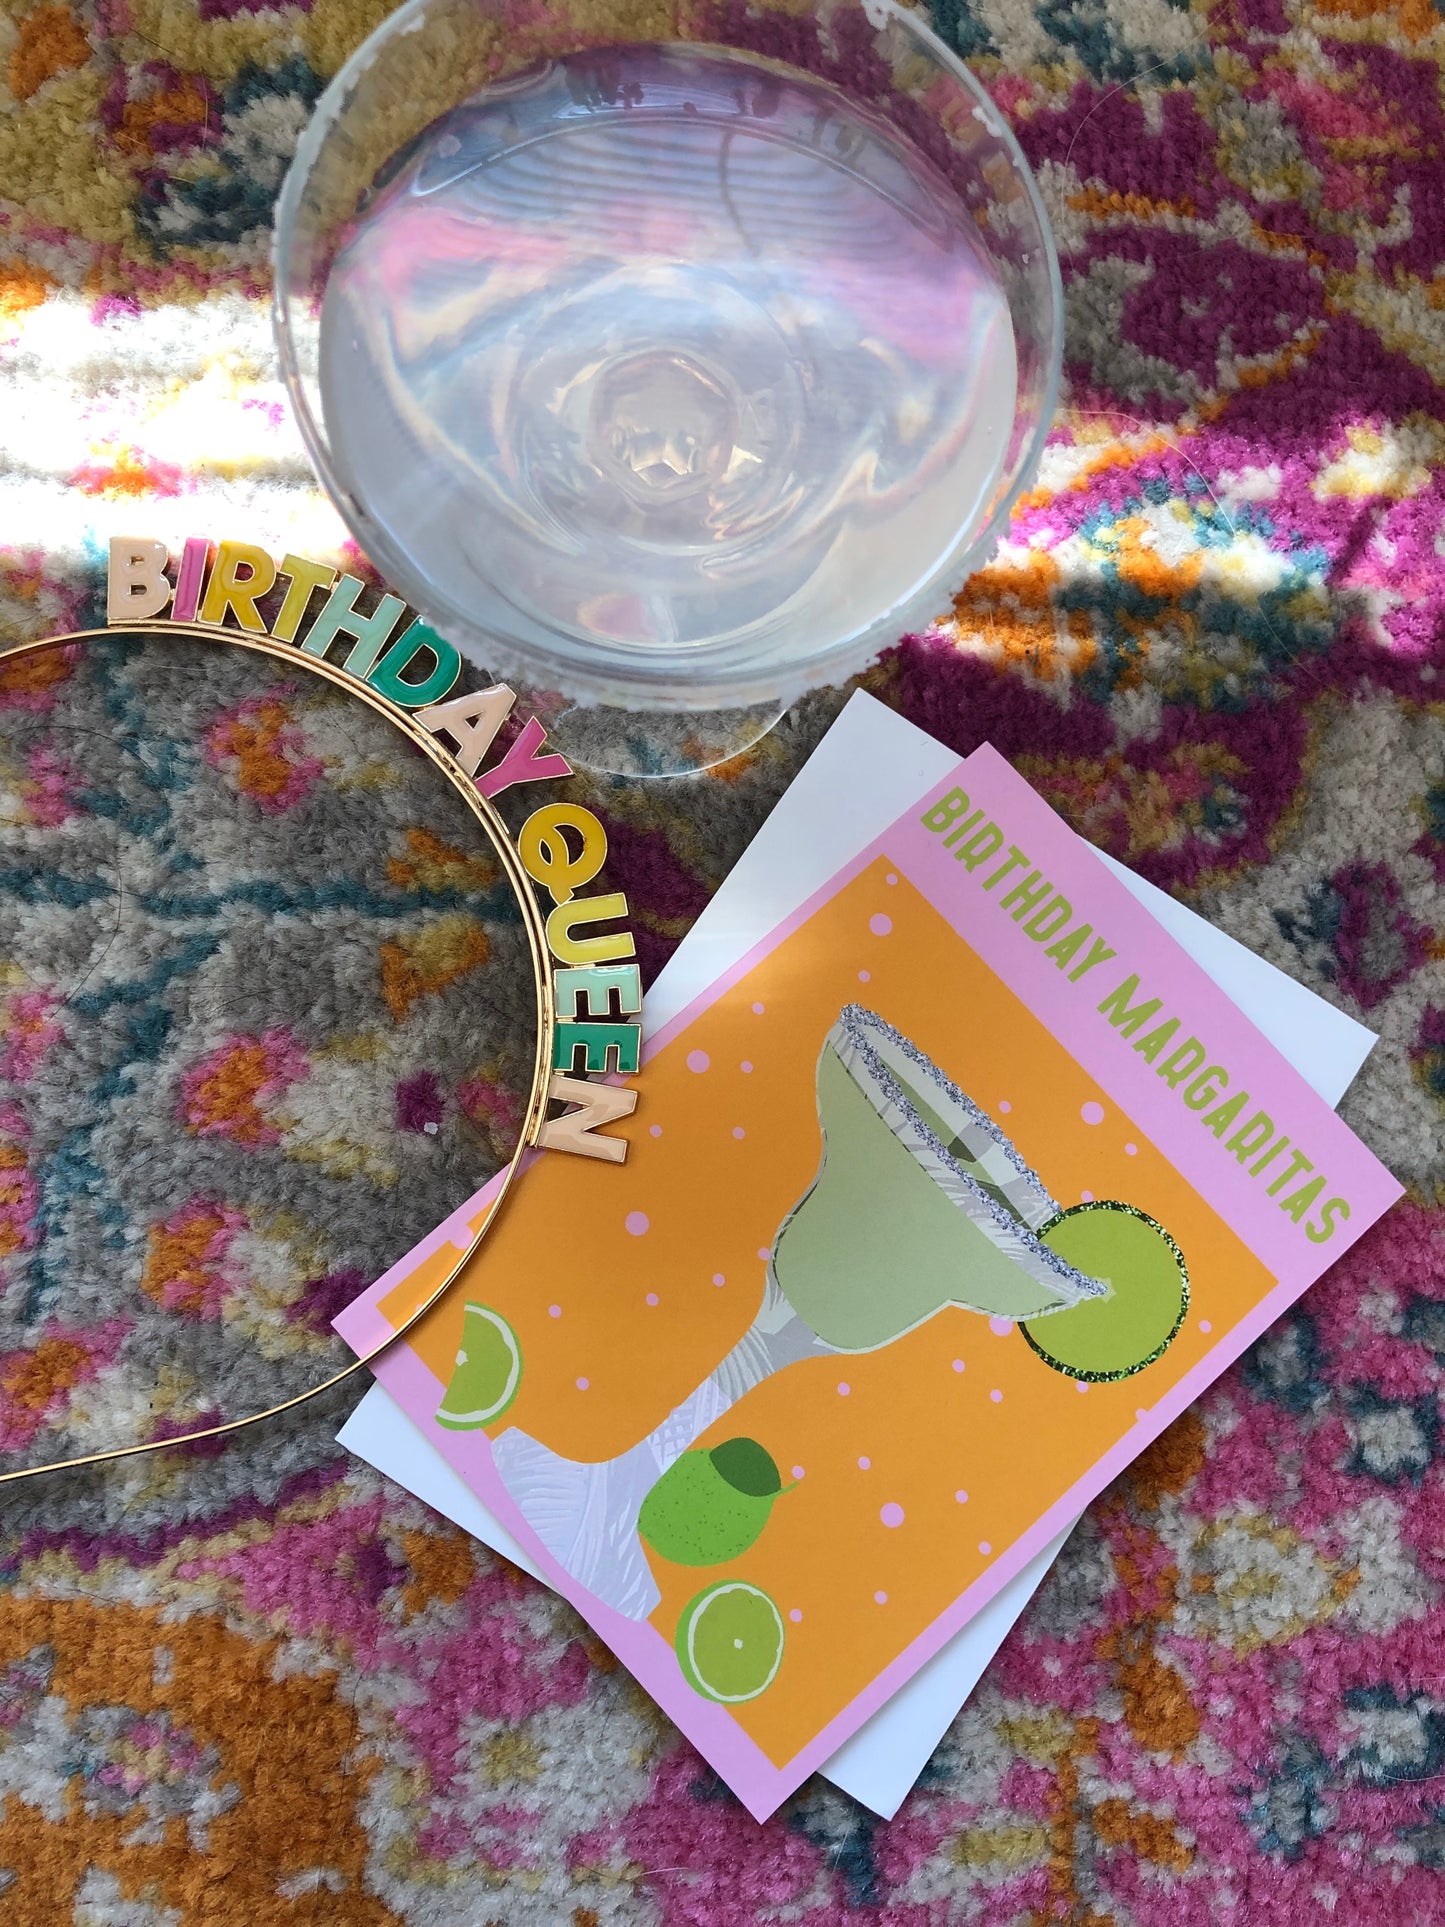 Bright and colourful birthday card featuring a margarita cocktail on a rug next to a glass and a birthday queen headband.